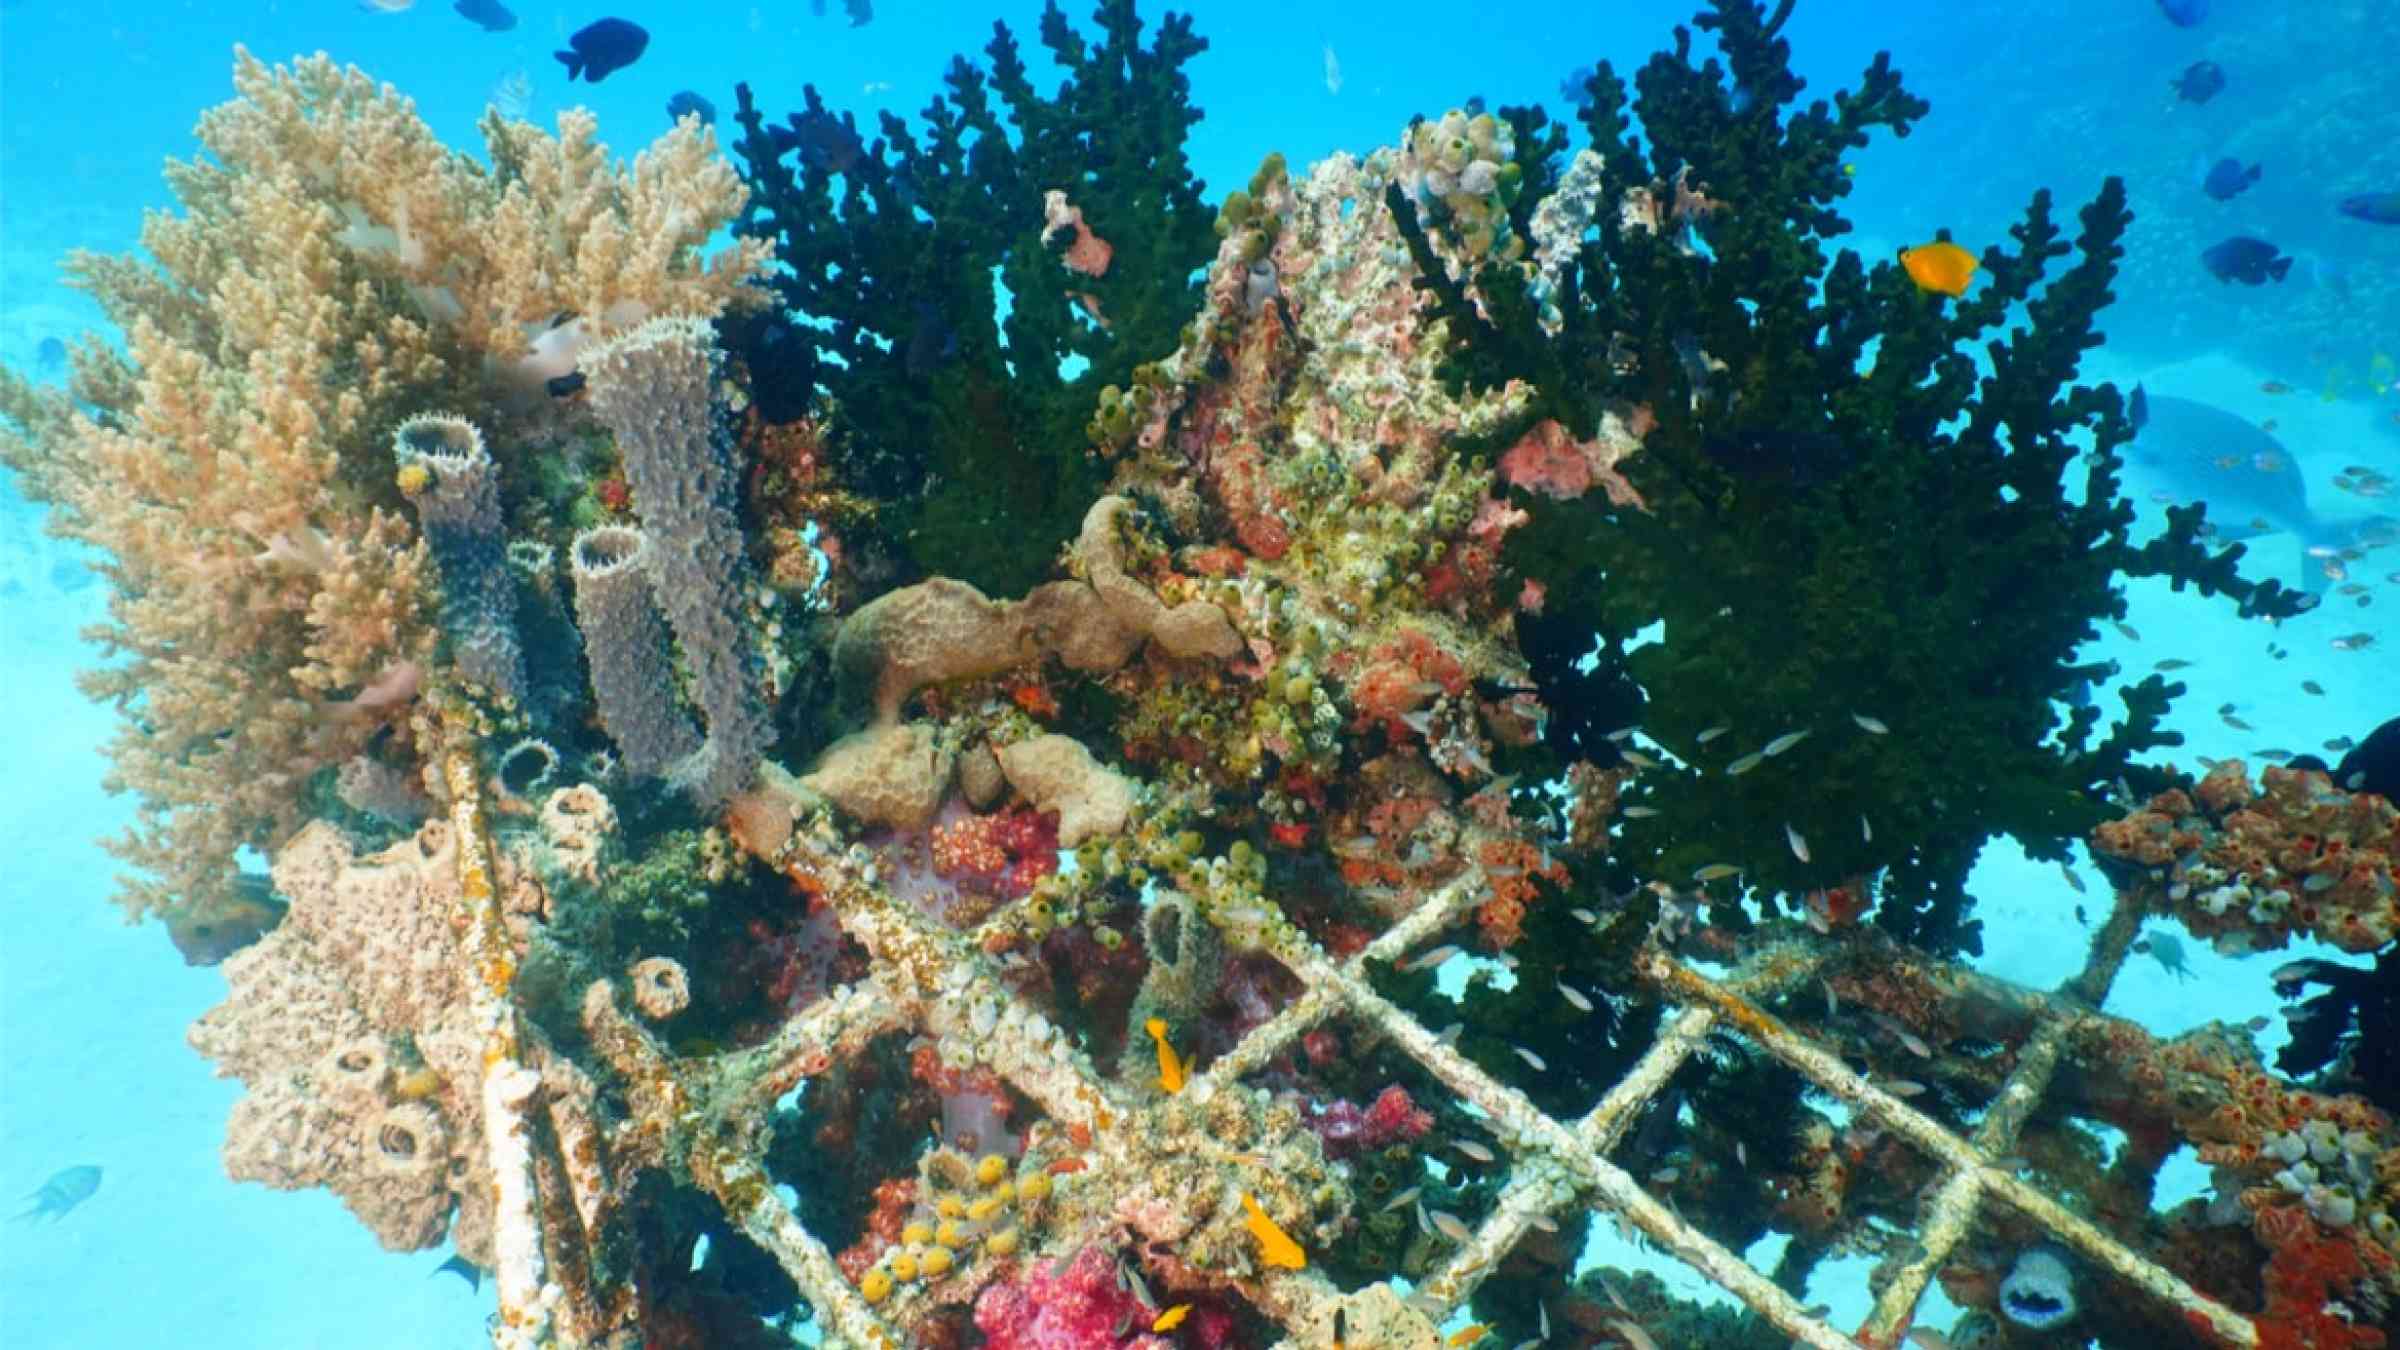 Corals growing on an artificial structure in Indonesia